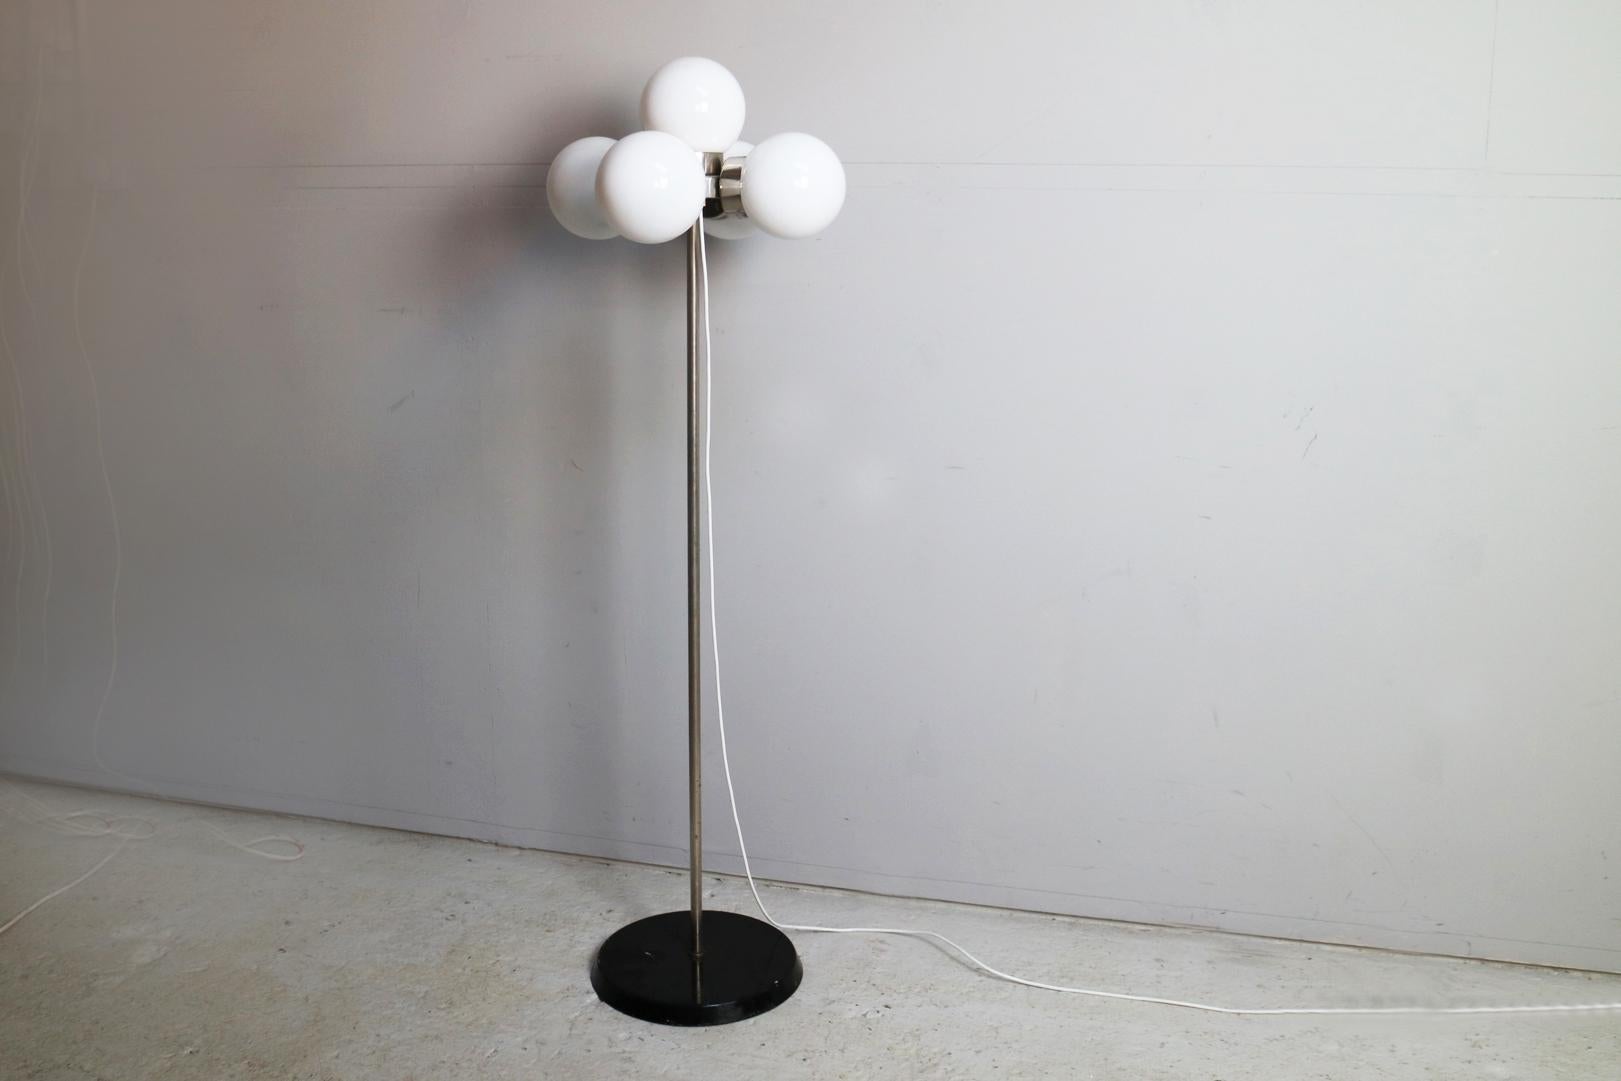 A lovely example of midcentury lamp design. 5 white glass globes sit in chrome fitments around a central chromed pole, with a black painted base. Solid and very well made.